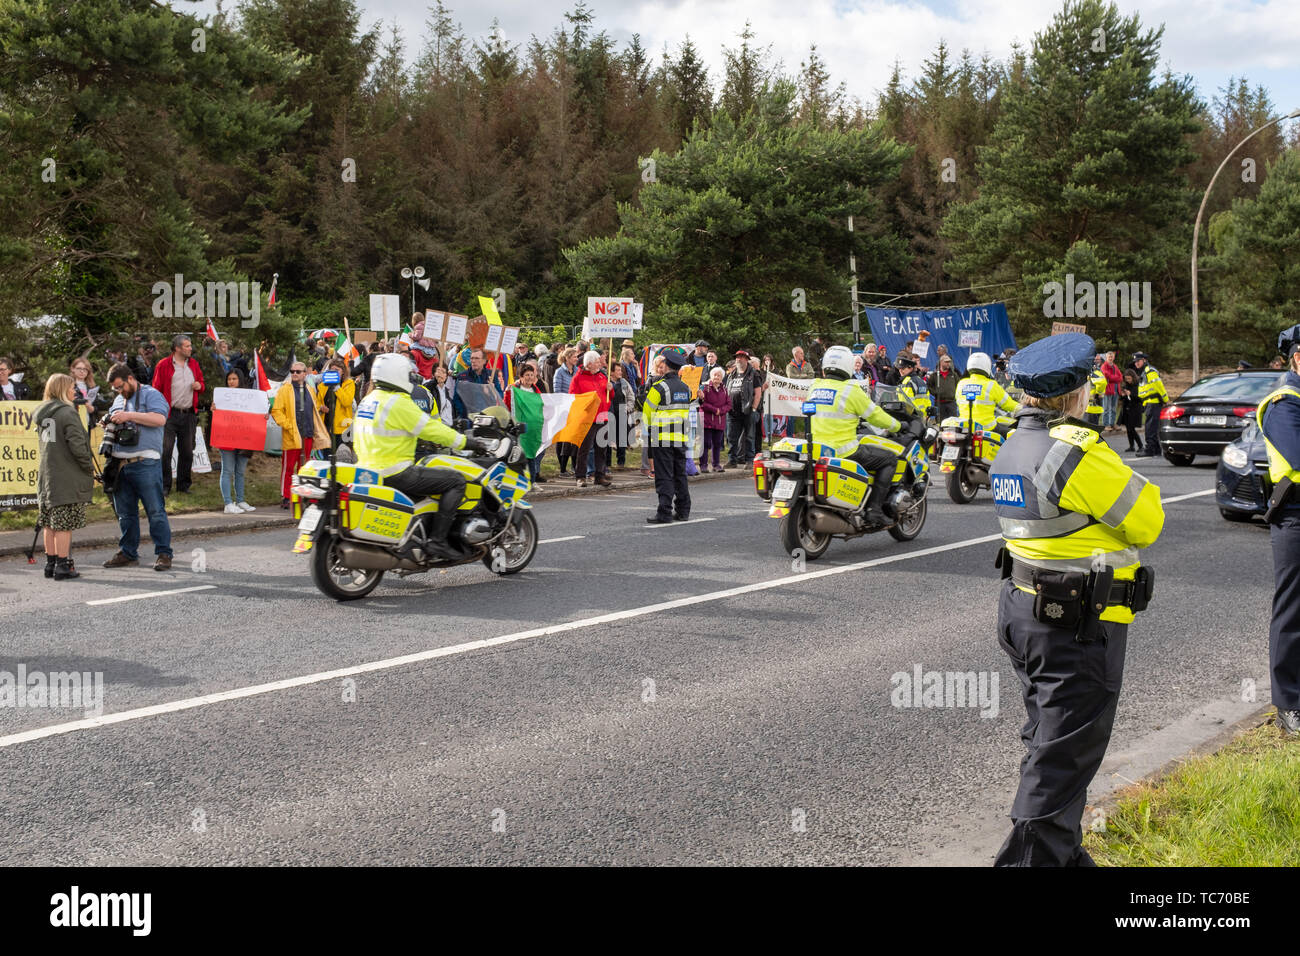 Shannon, Ireland, June. 5, 2019: Protestors outside Shannon Airport protesting against the Donald Trump visit today Stock Photo